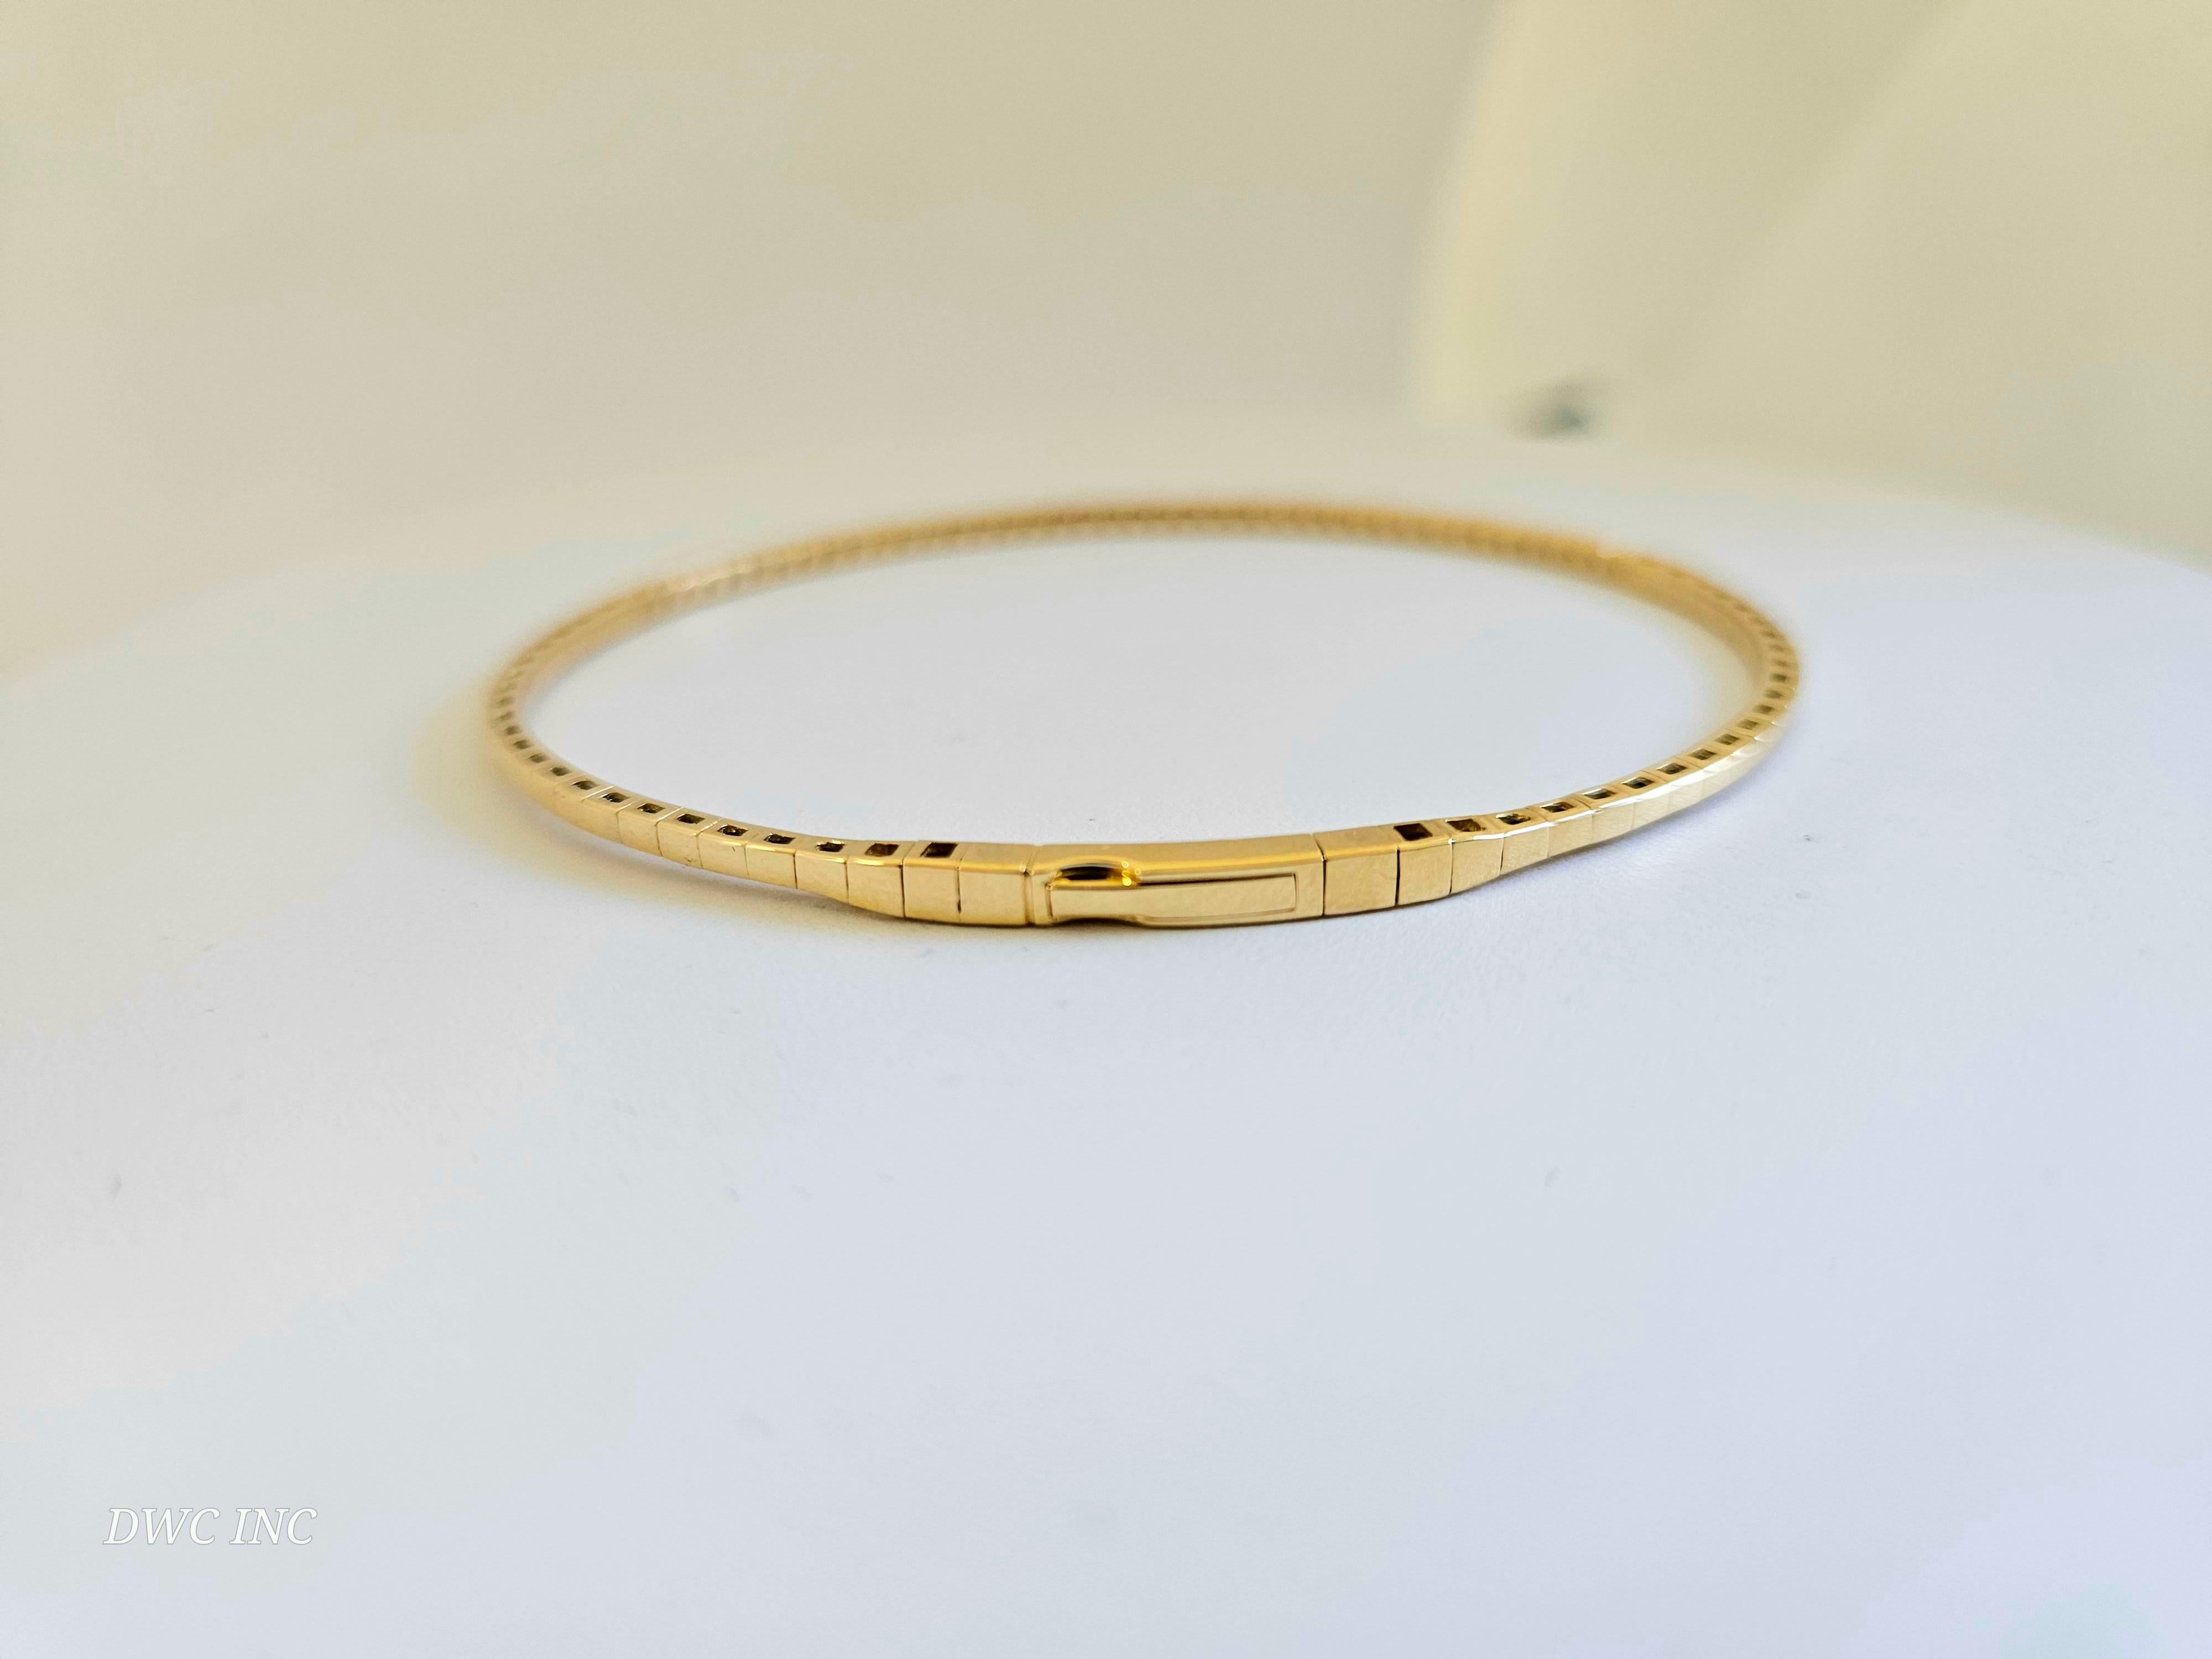 0.68 Carat Round Brilliant Cut Diamond Mini bangle Bracelet 14 Karat Yellow Gold In New Condition For Sale In Great Neck, NY